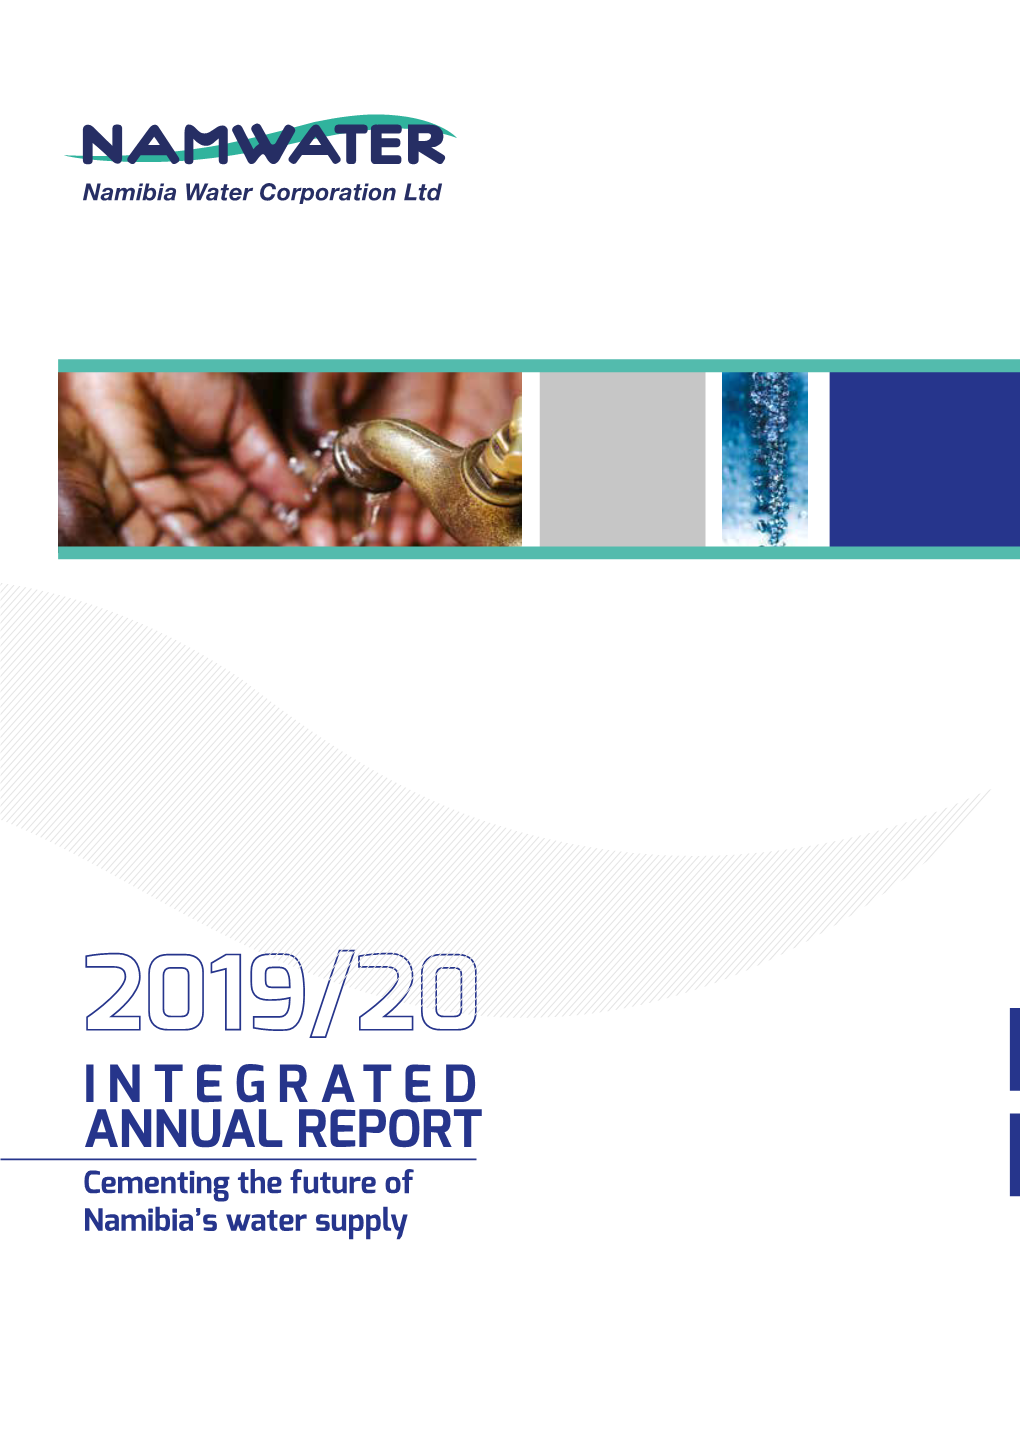 Annual Report Integrated